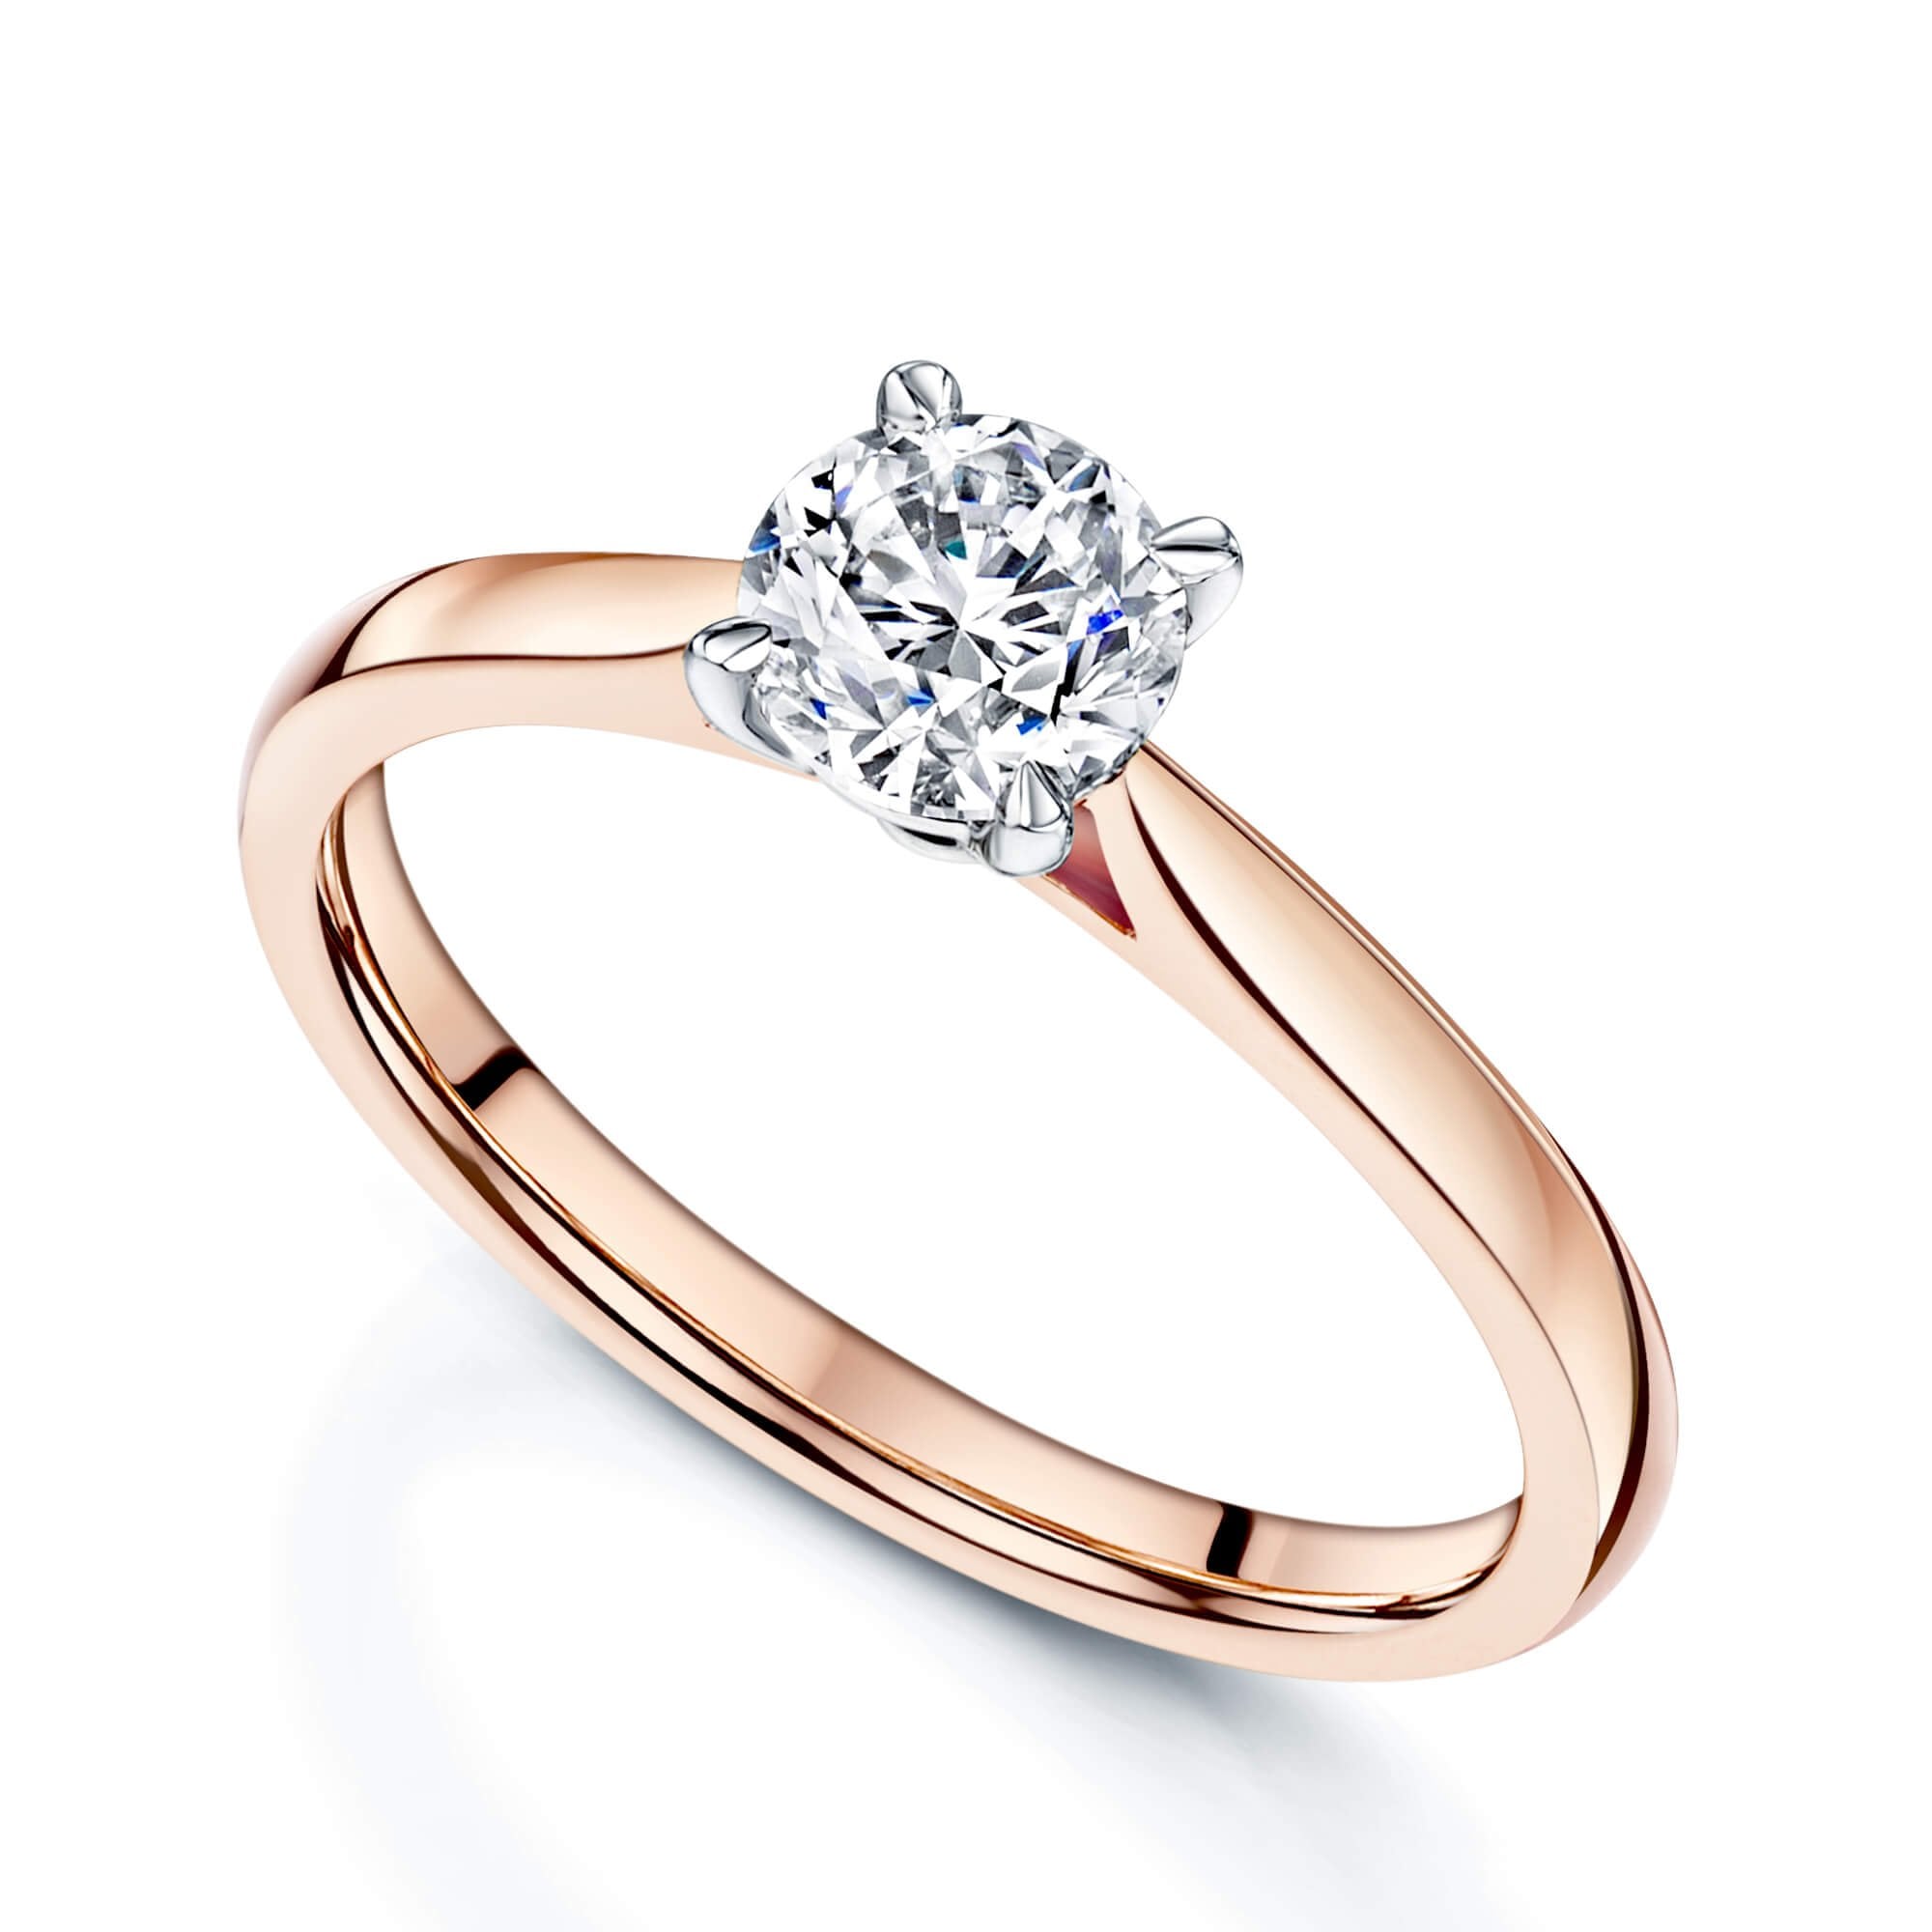 Simply Solitaire Collection 18ct Rose Gold Diamond Solitaire Engagement Ring GIA Certified 0.70 Carat